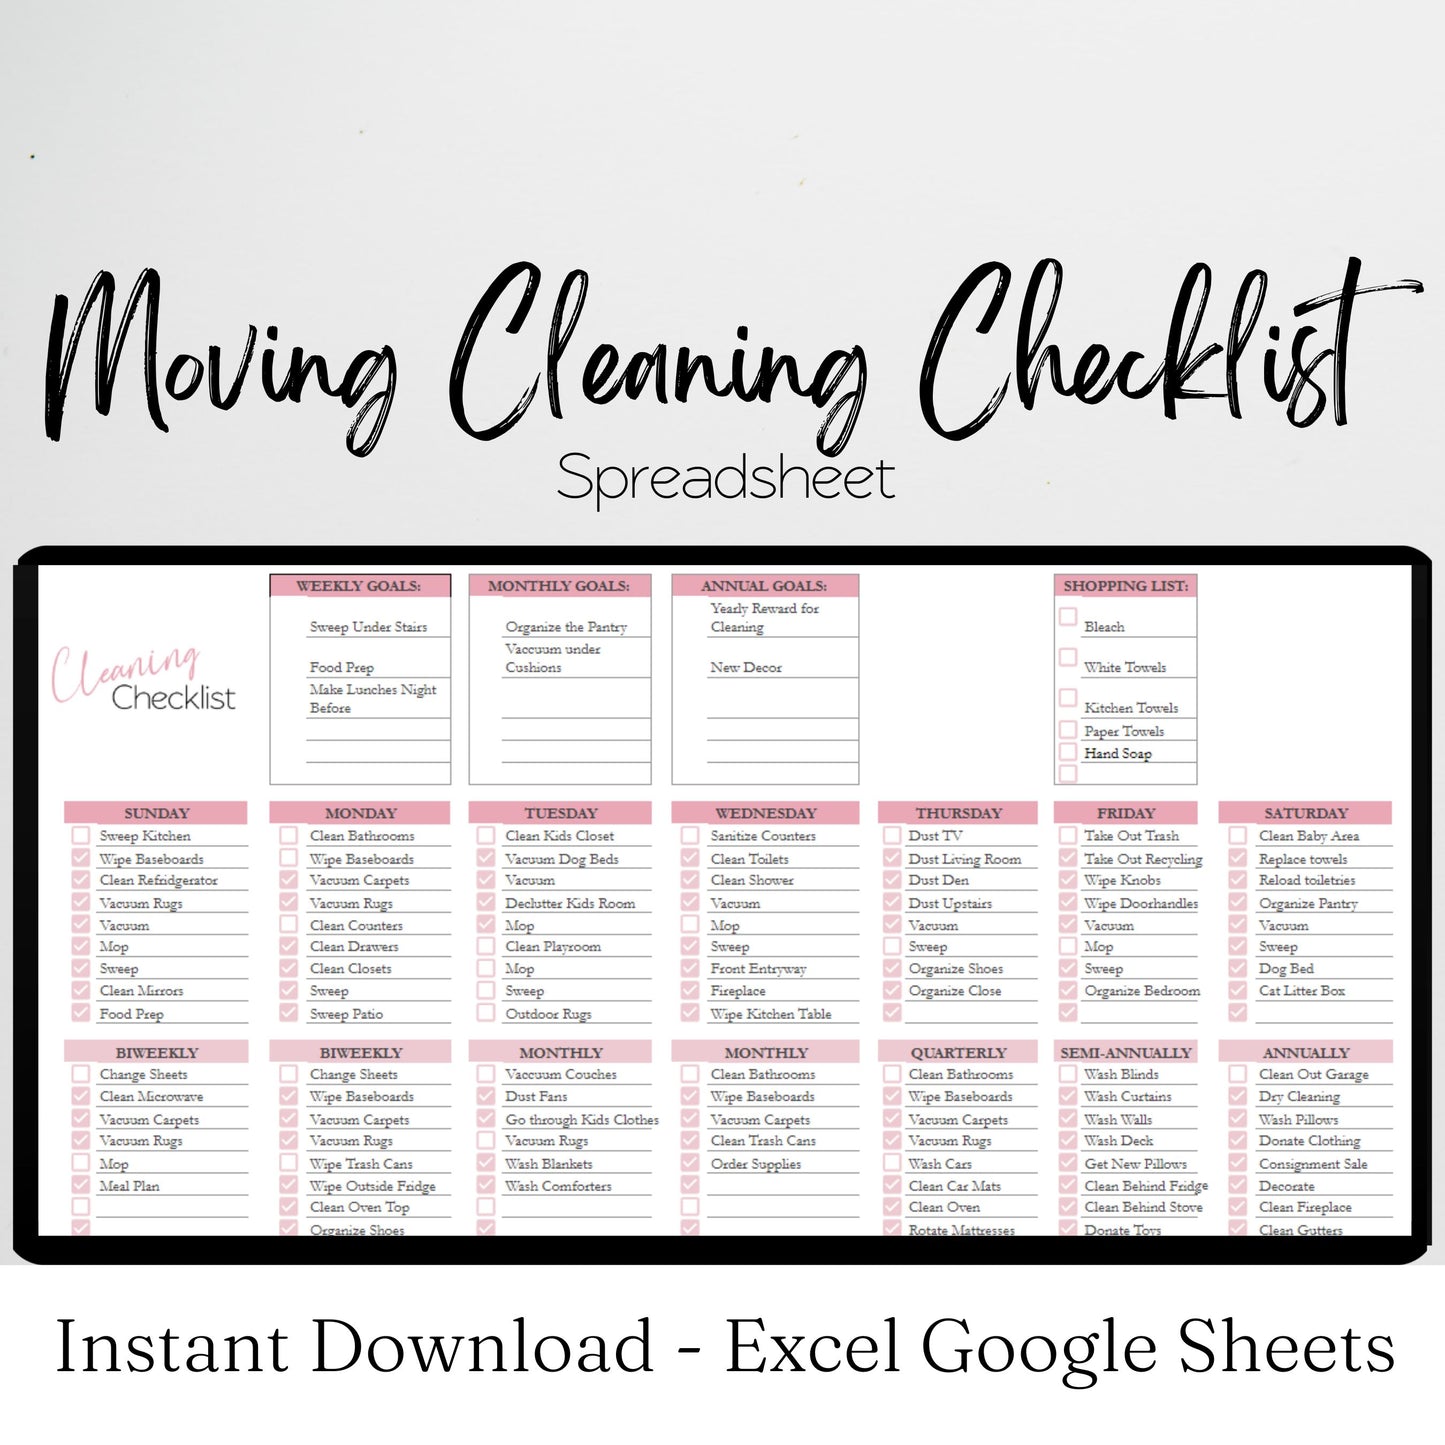 Moving Cleaning Checklist Google Sheet and Excel Spreadsheet